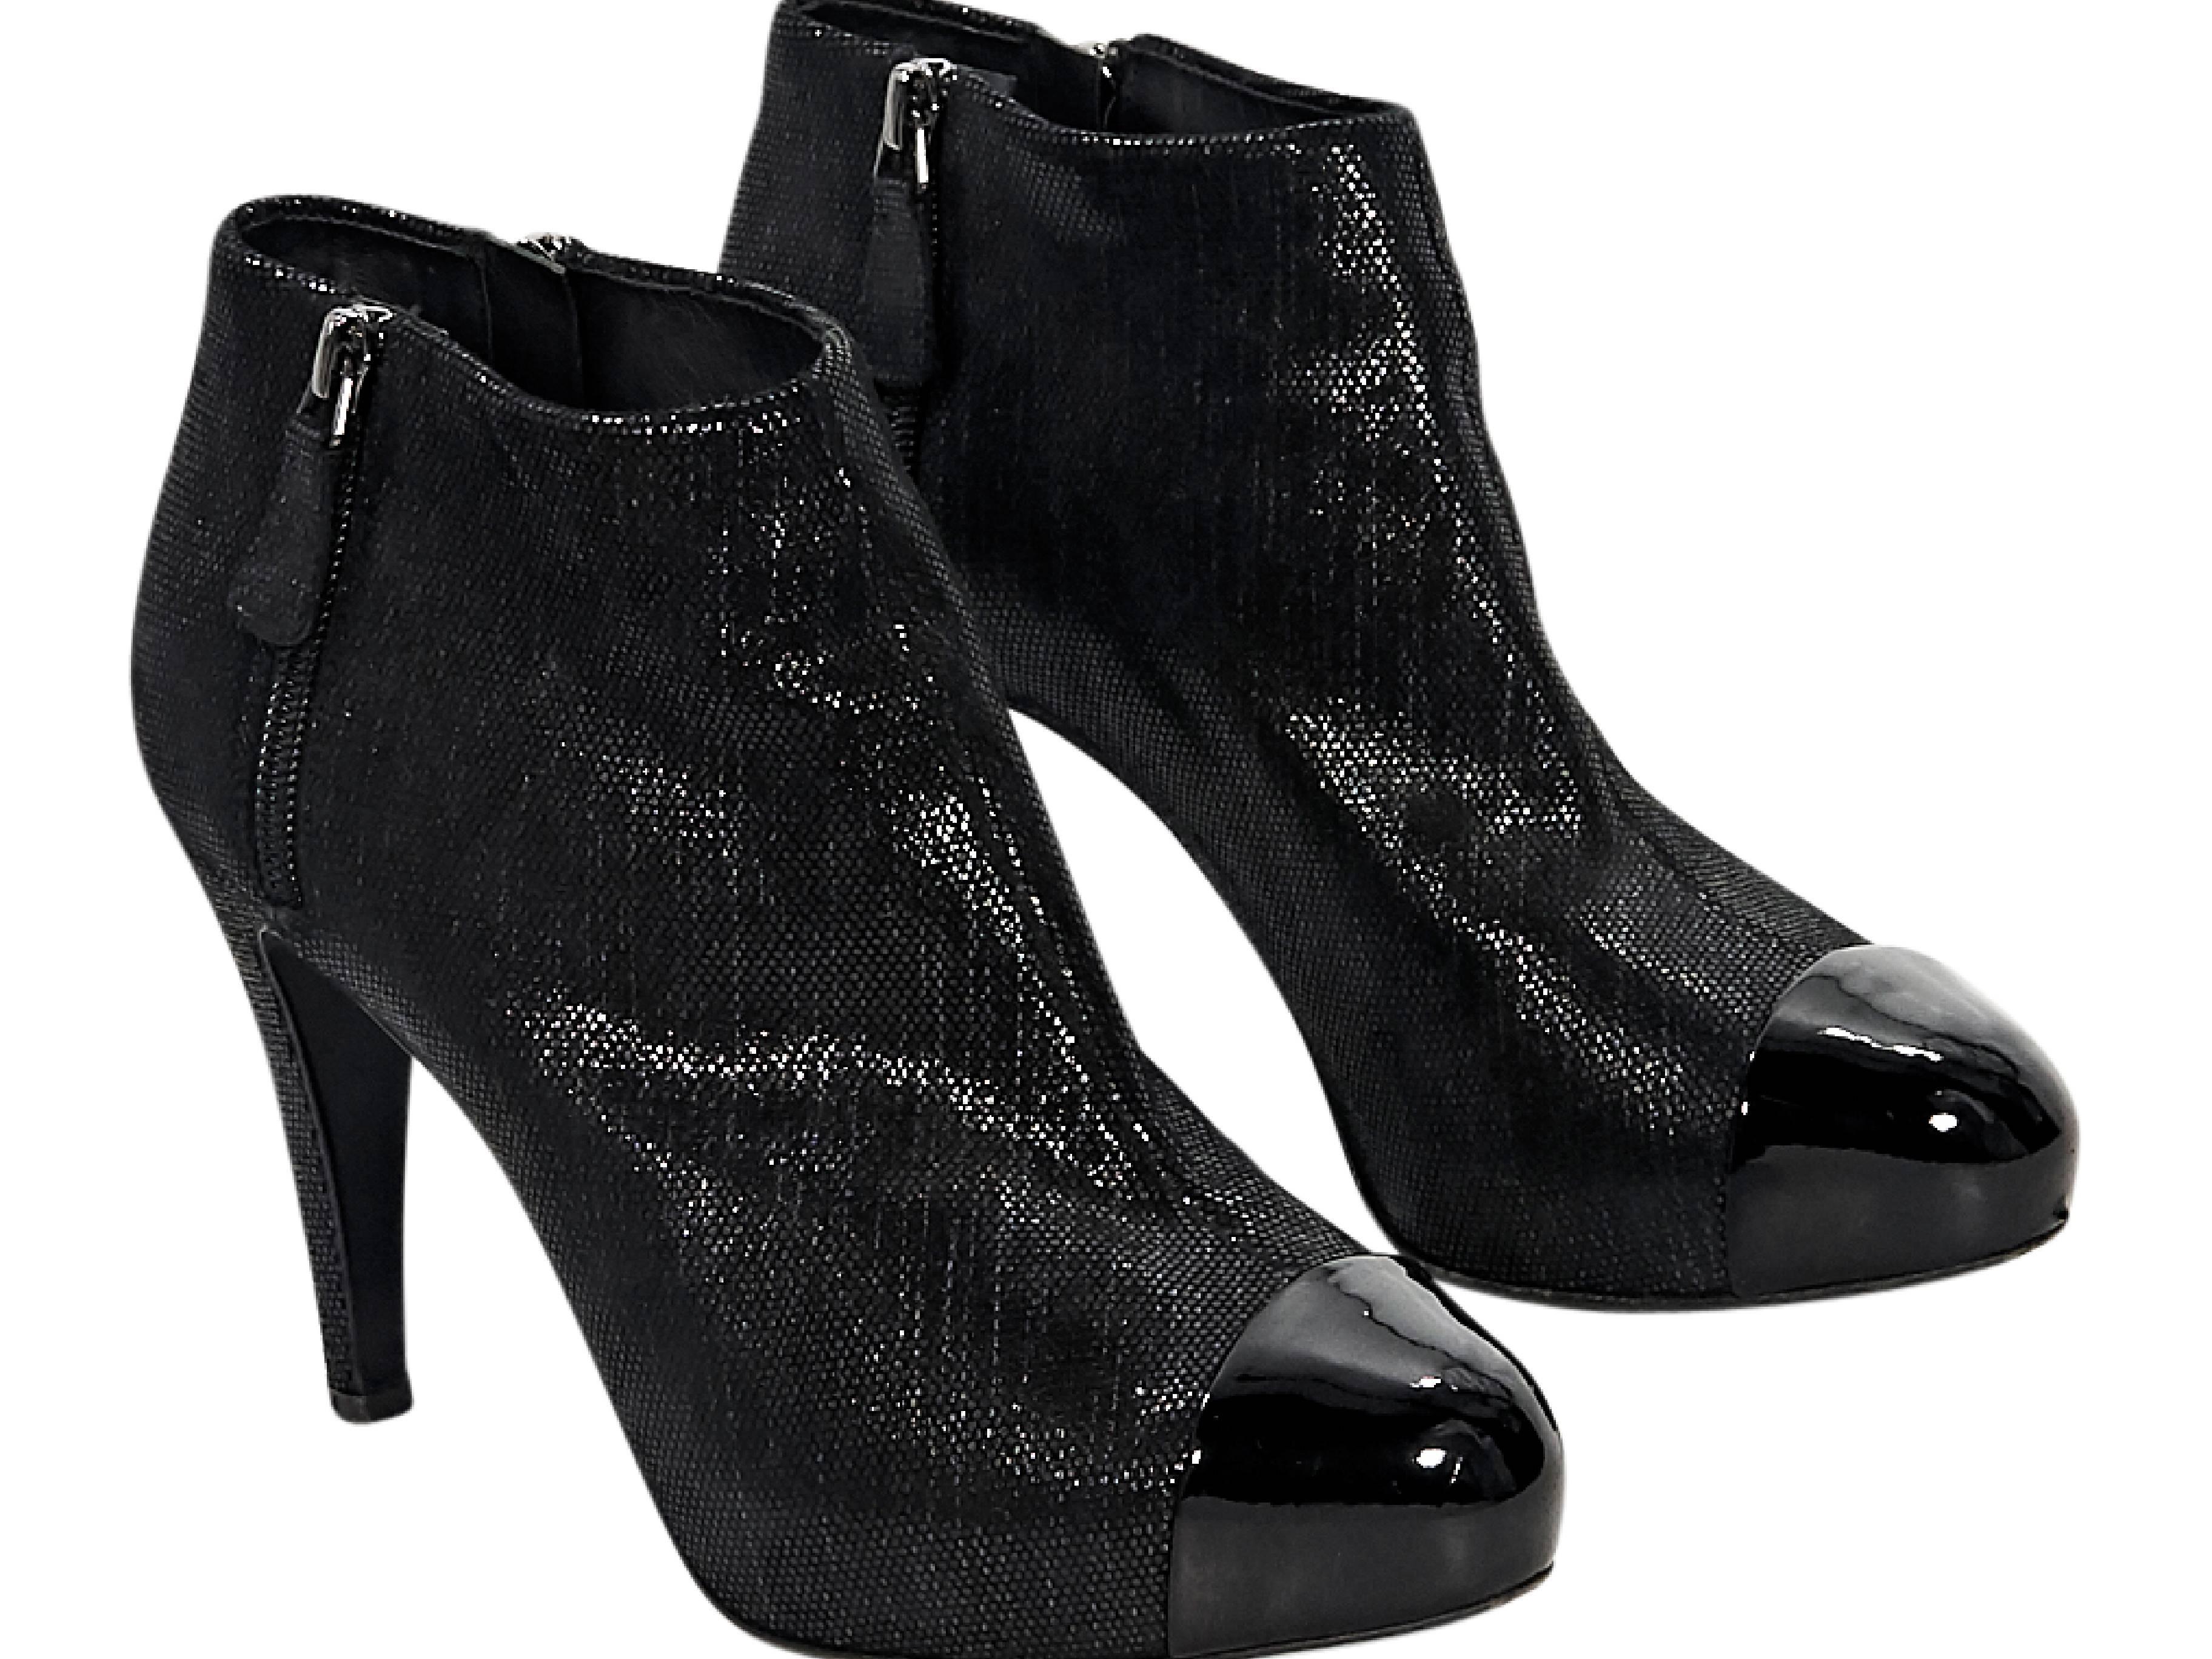 Product details:  Black embossed ankle boots by Chanel.  Outer and inner zip closures.  Round patent leather cap toe.  Concealed platform. 
Condition: Pre-owned. Very good. 
Est. Retail $ 1,795.00